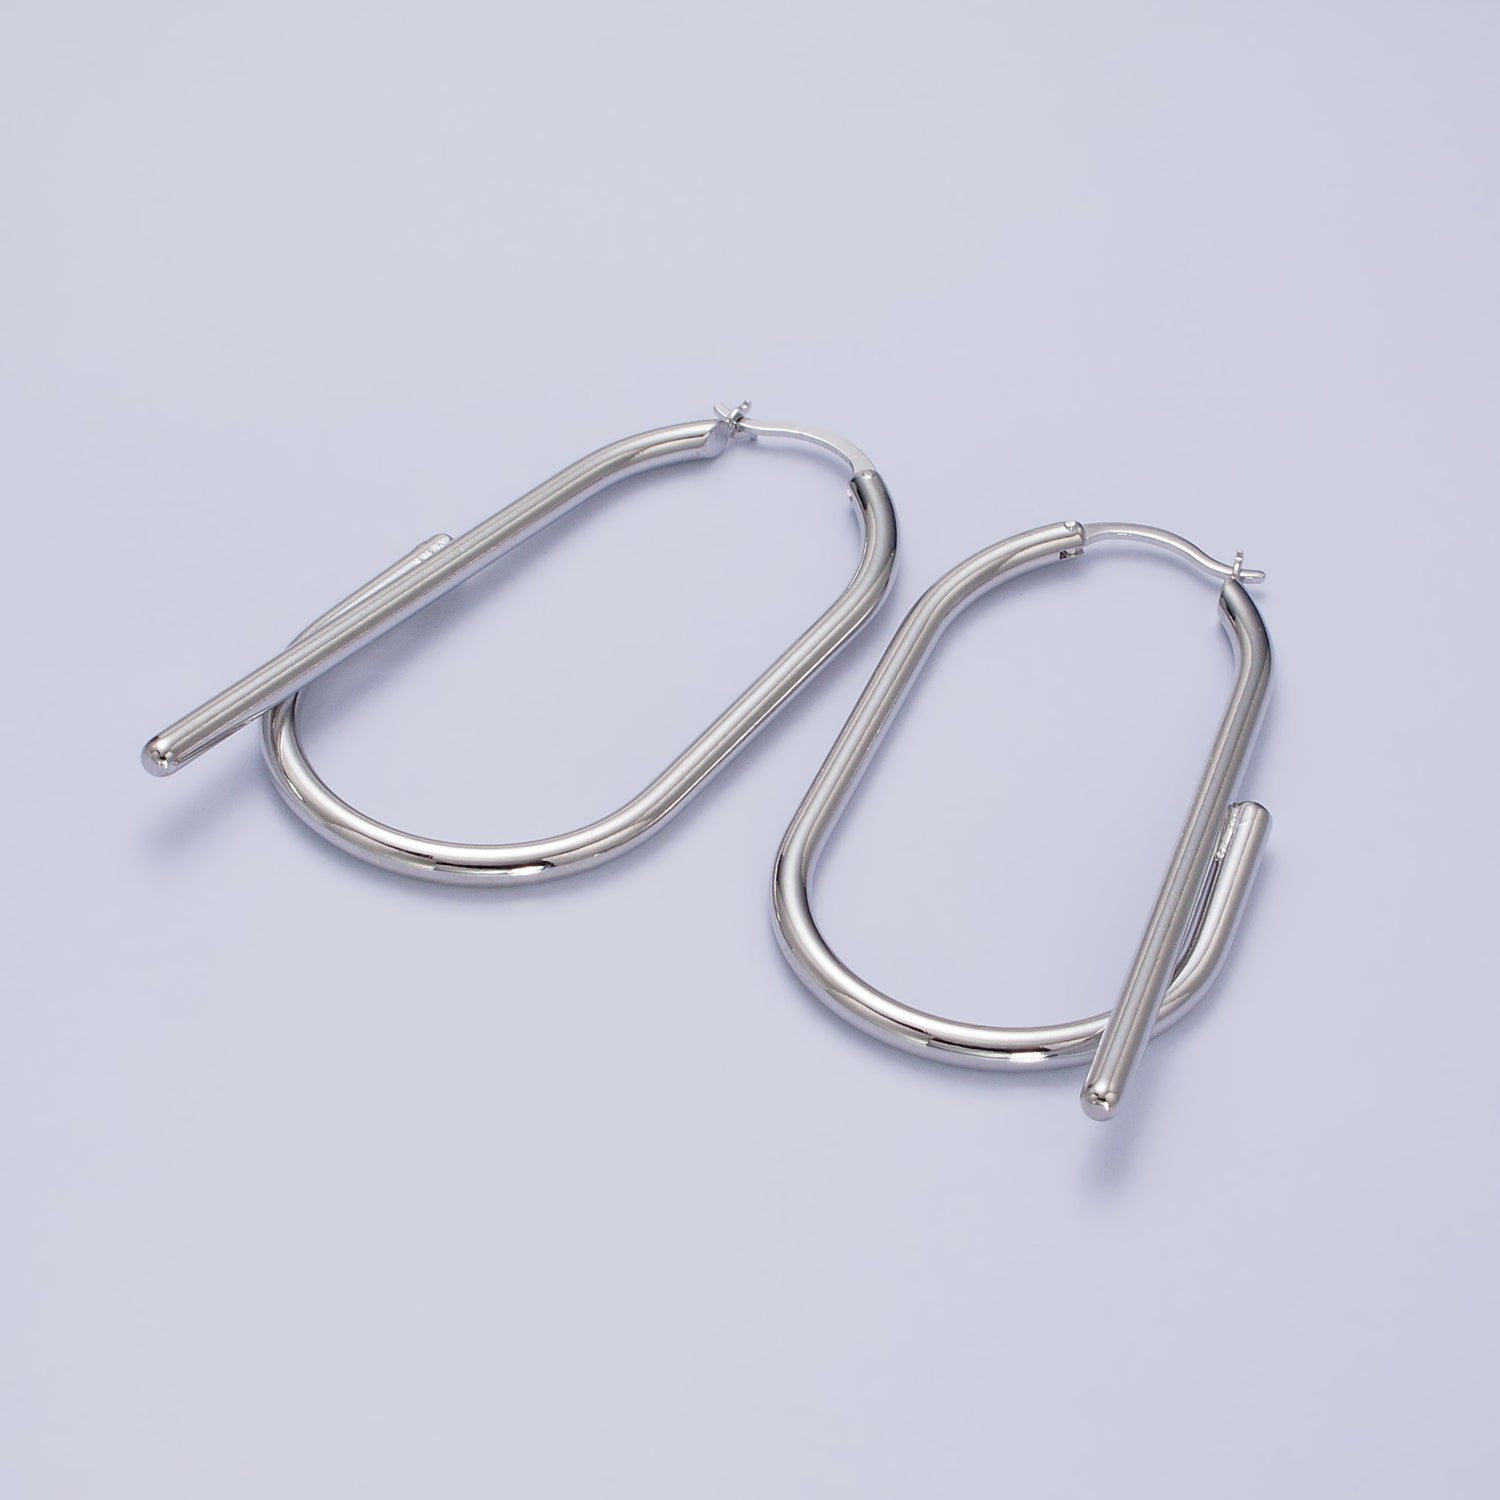 Gold Twisted Oval Hinged Hoop Earring with Hinged Closure Silver Big Oval Hoop Statement Jewelry AB733 AB942